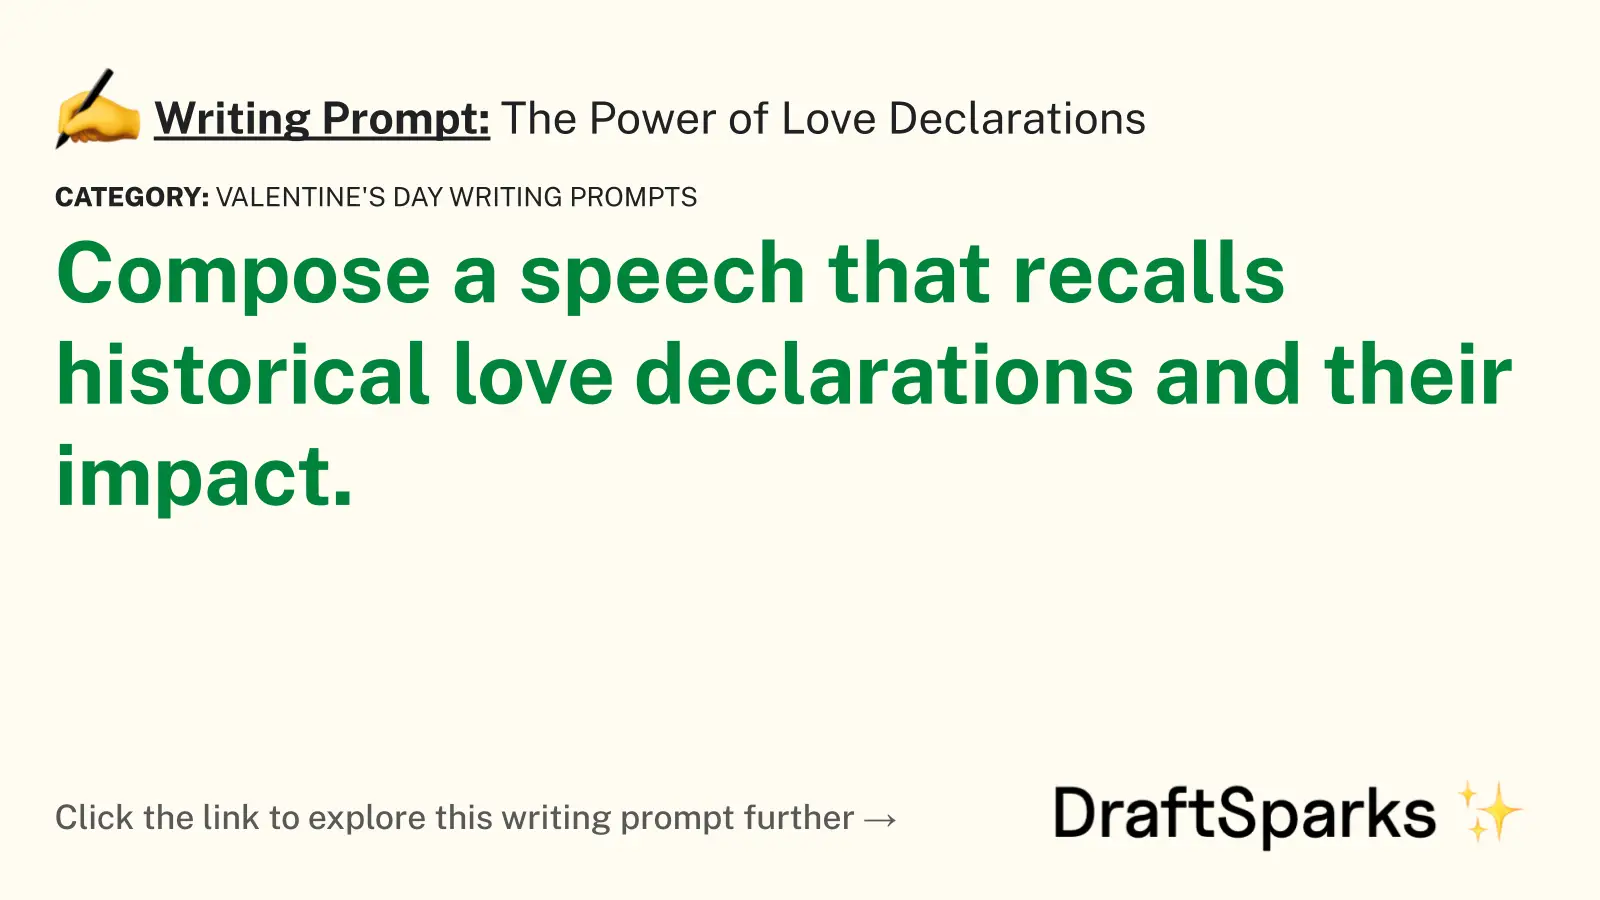 The Power of Love Declarations